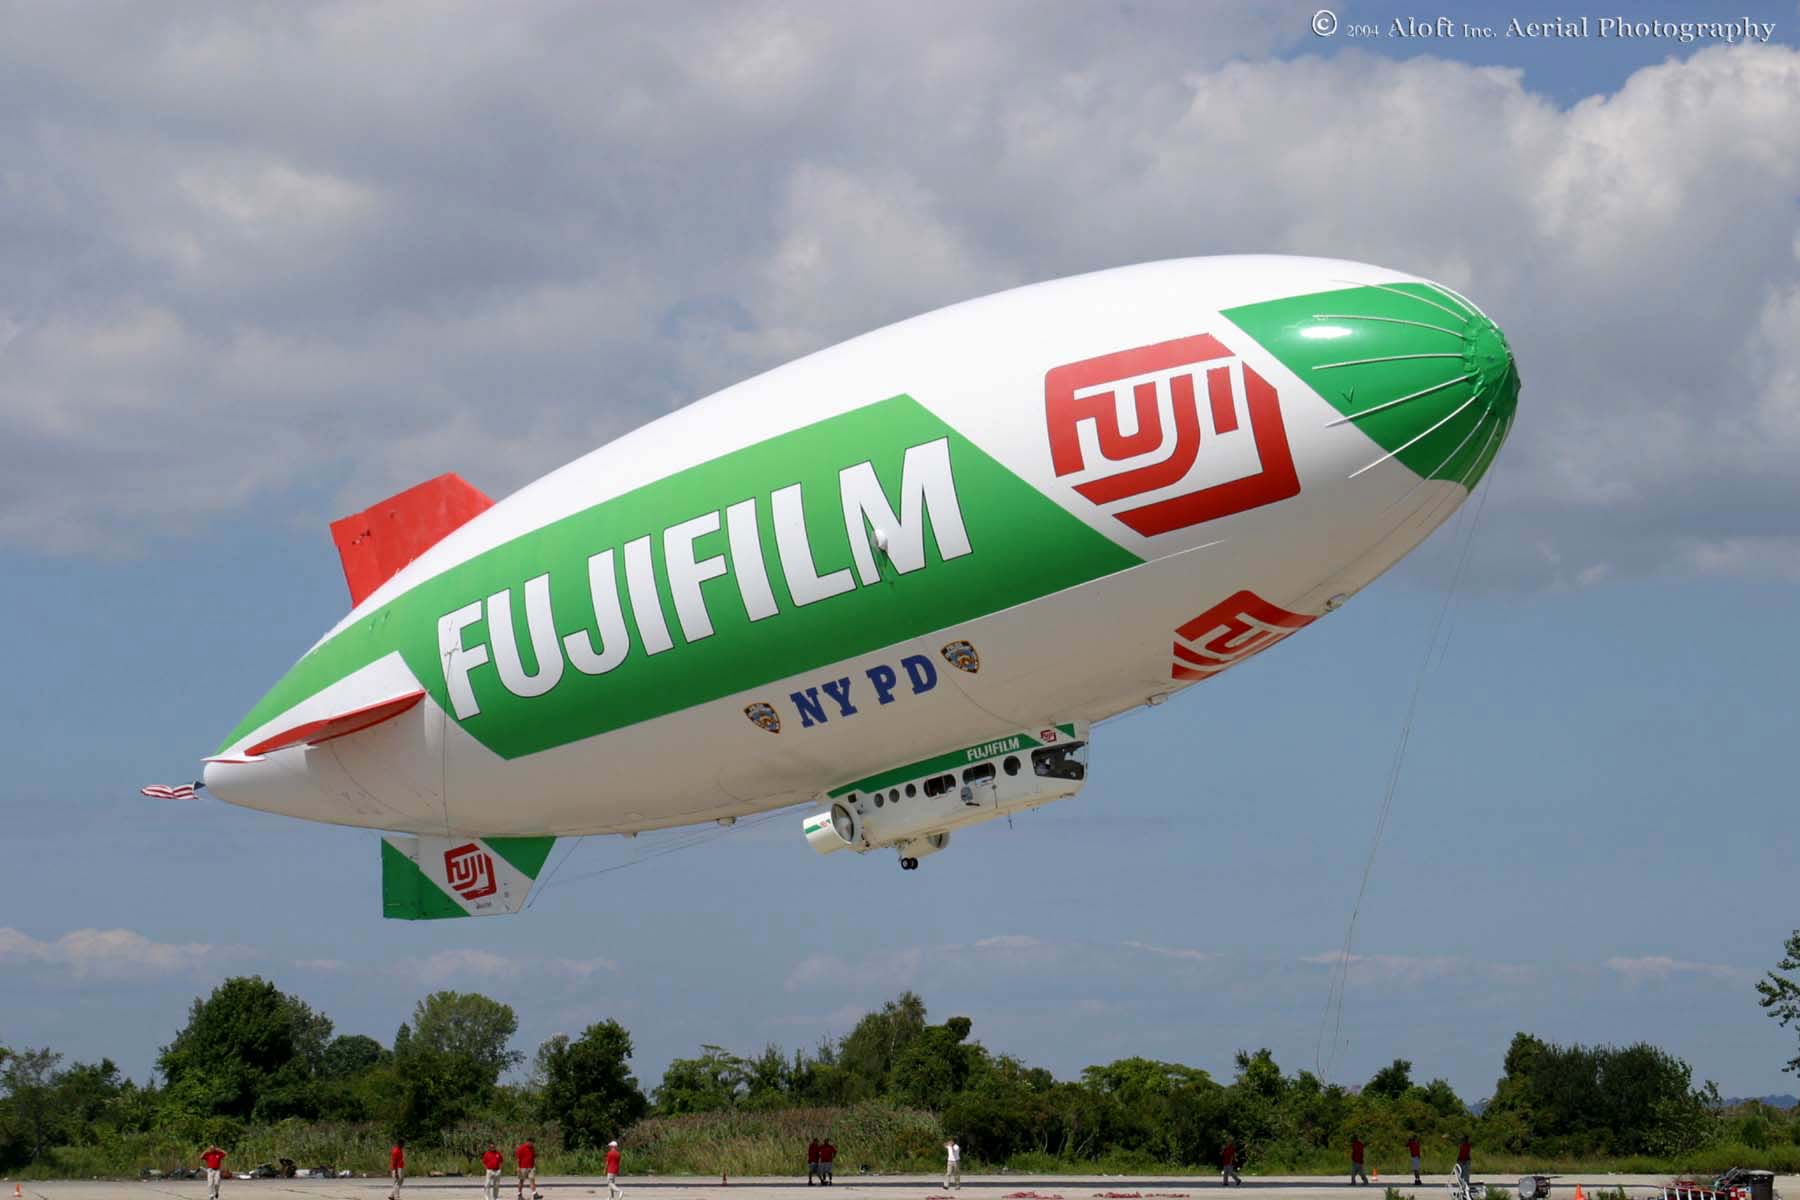 A large white and green blimp flying over the grass.